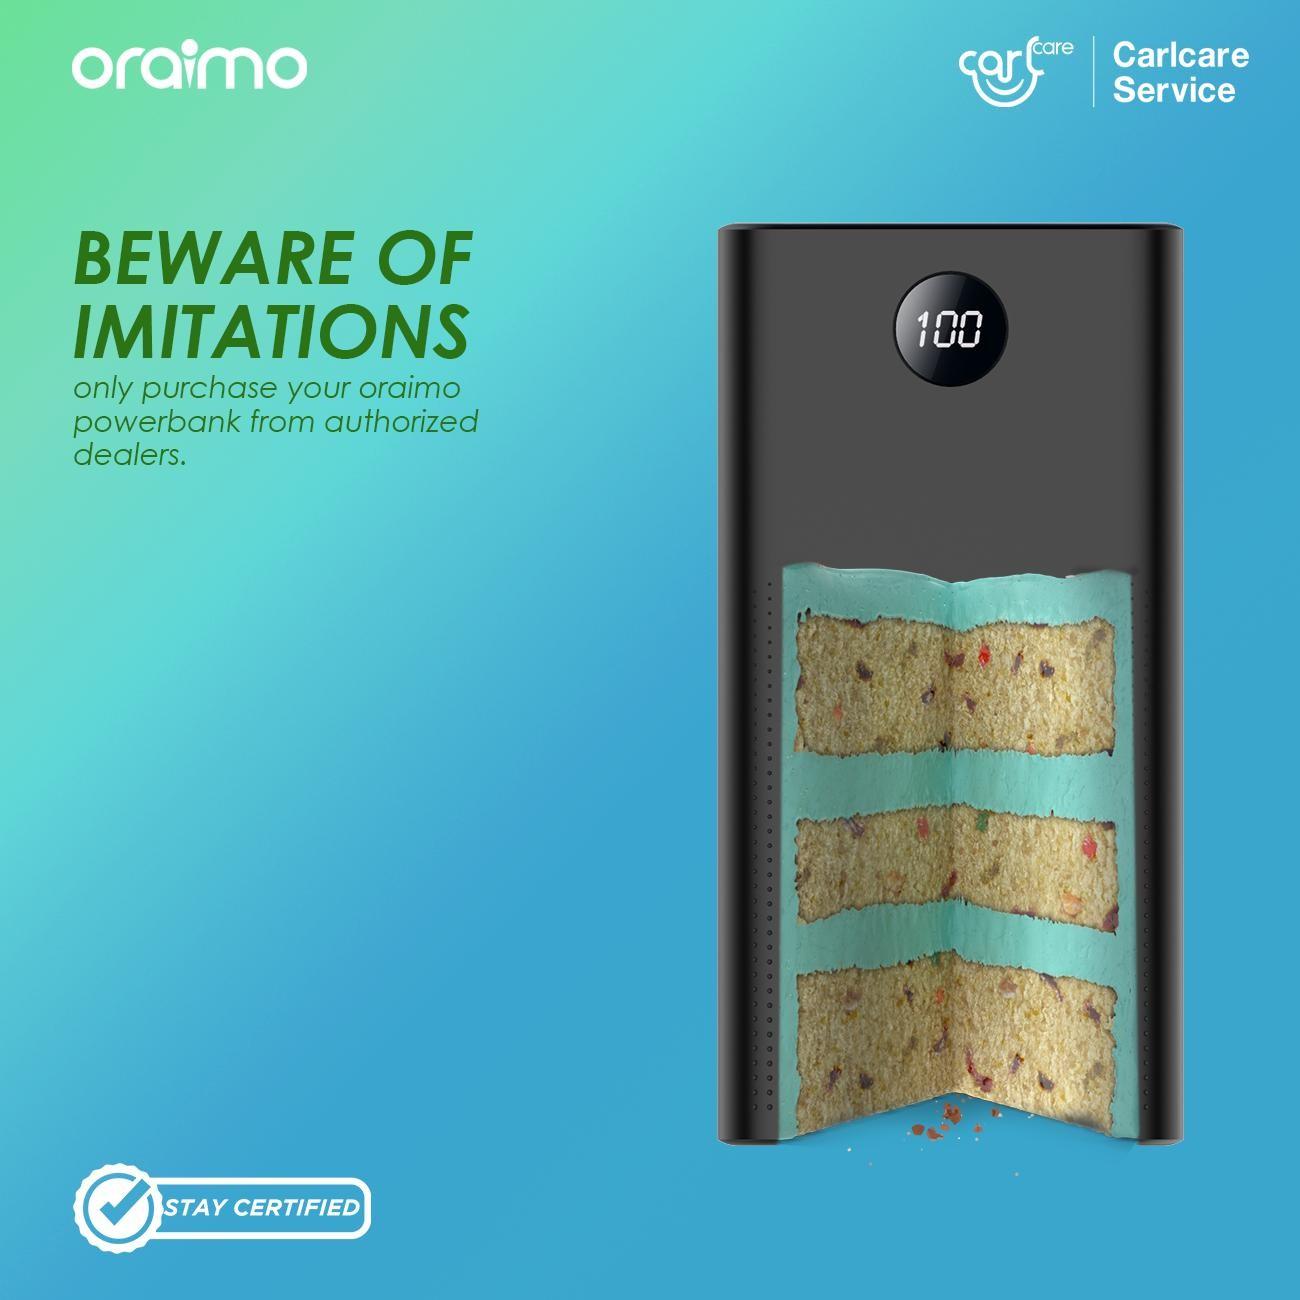 oraimo's Power Series: Setting New Standards in Quality and Reliability